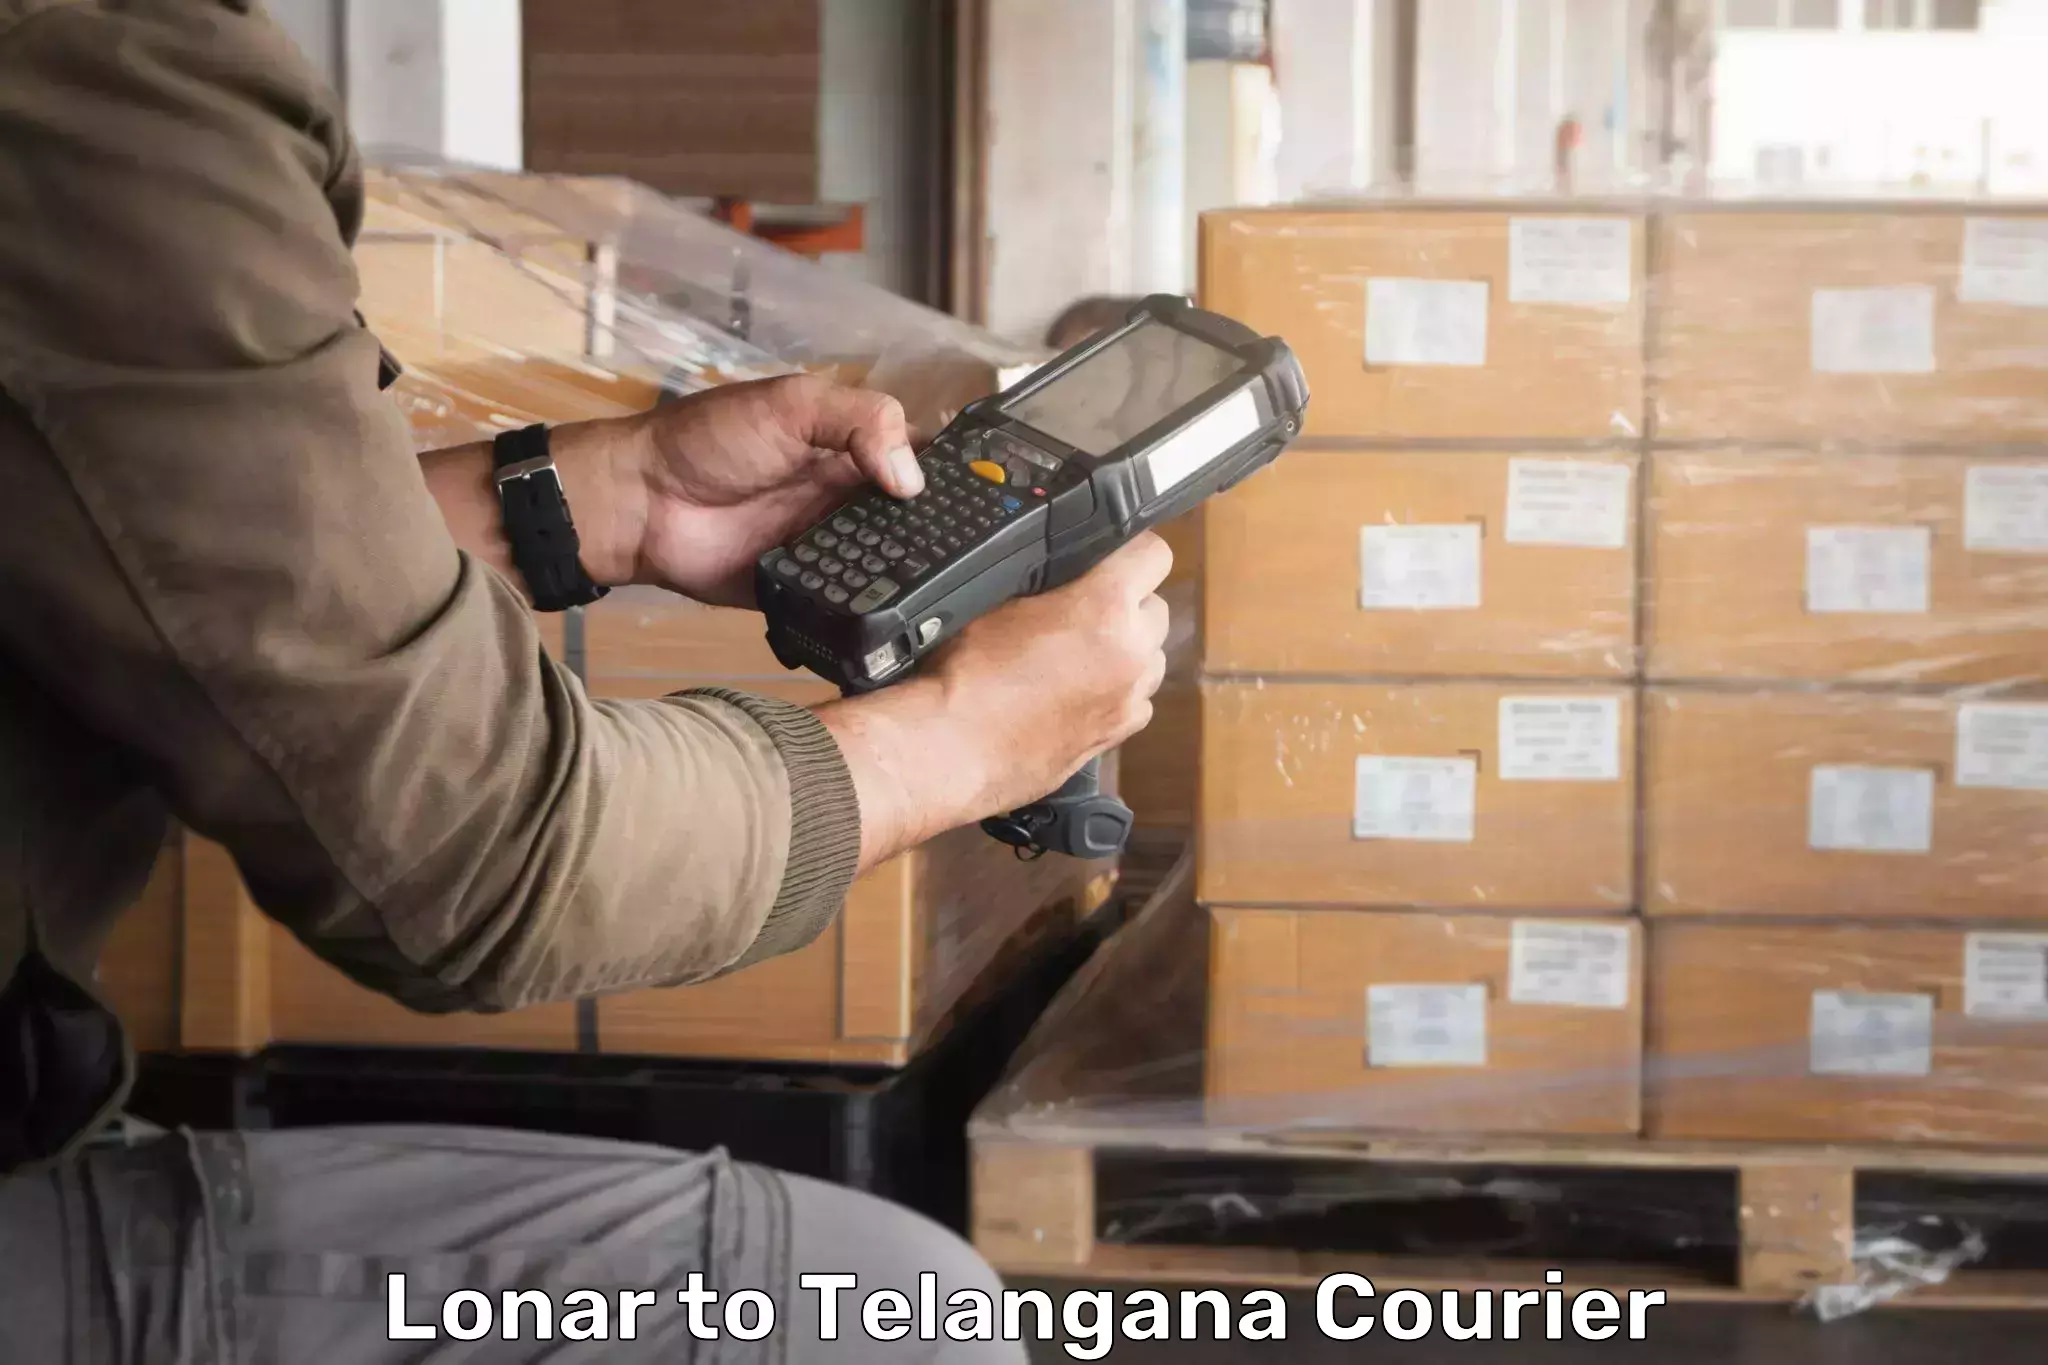 Customer-focused courier Lonar to Sathupally